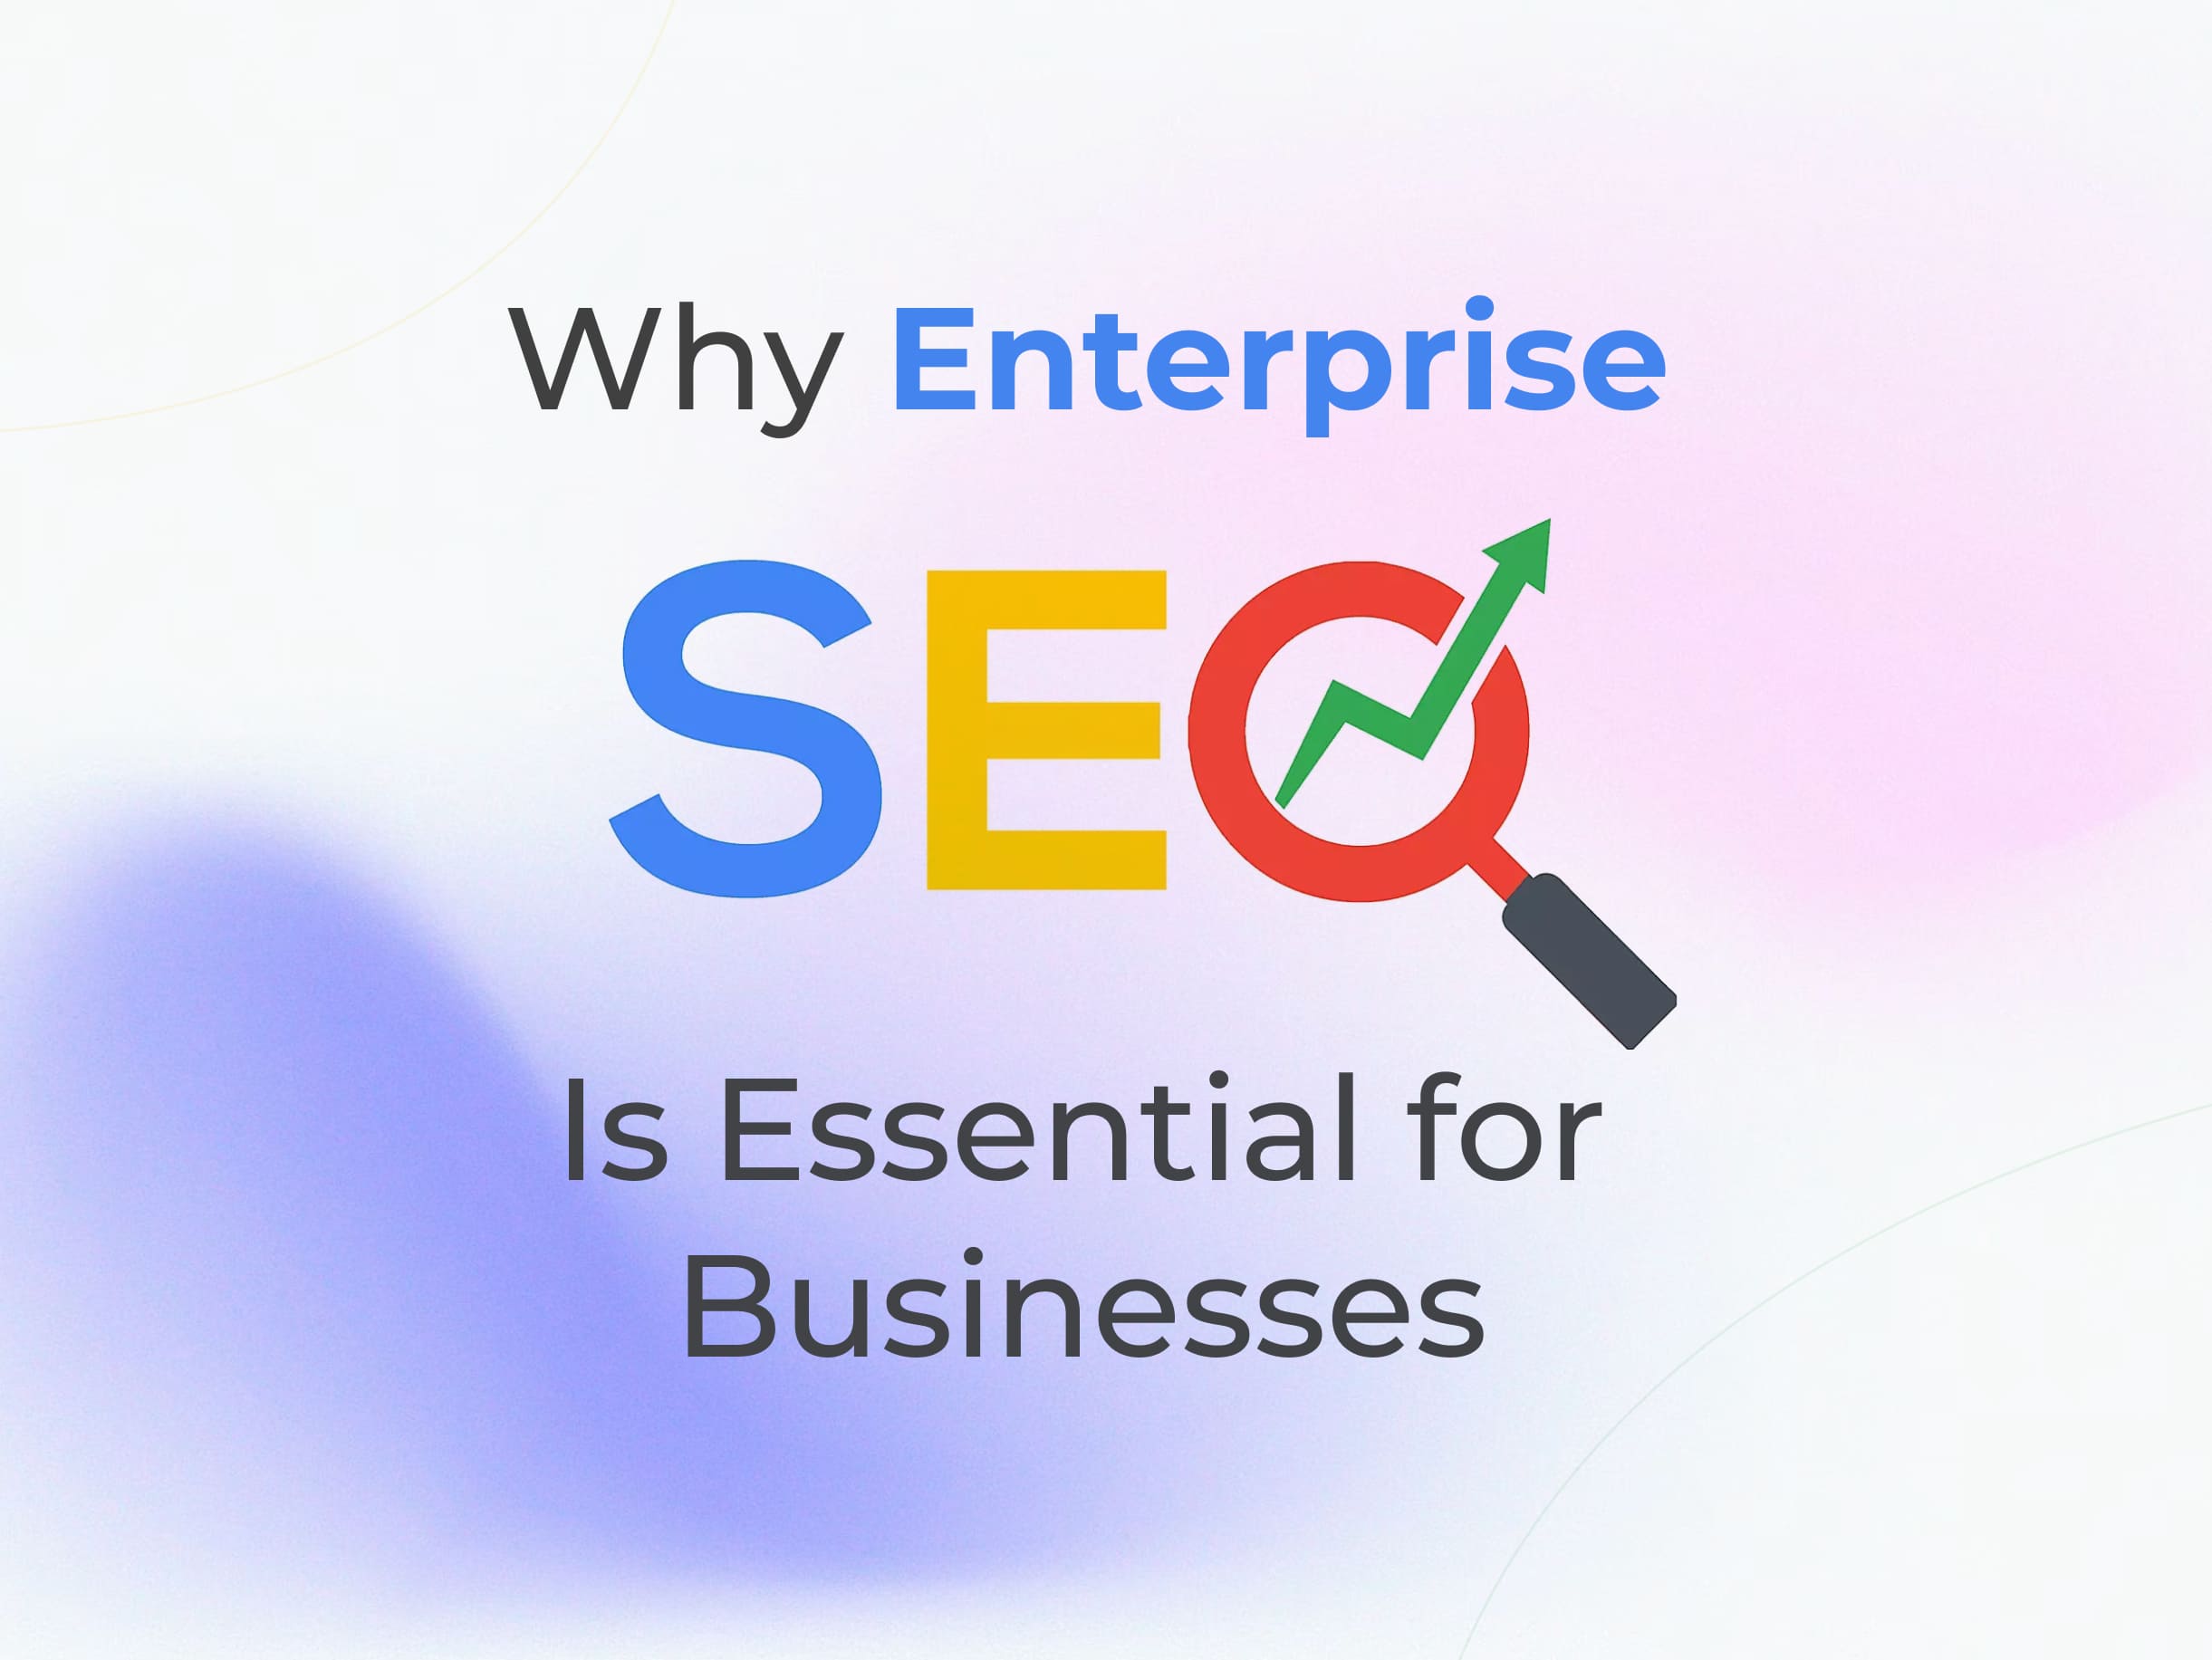 Outrank Your Competitors in Search Results Why Enterprise SEO Is Essential for Businesses